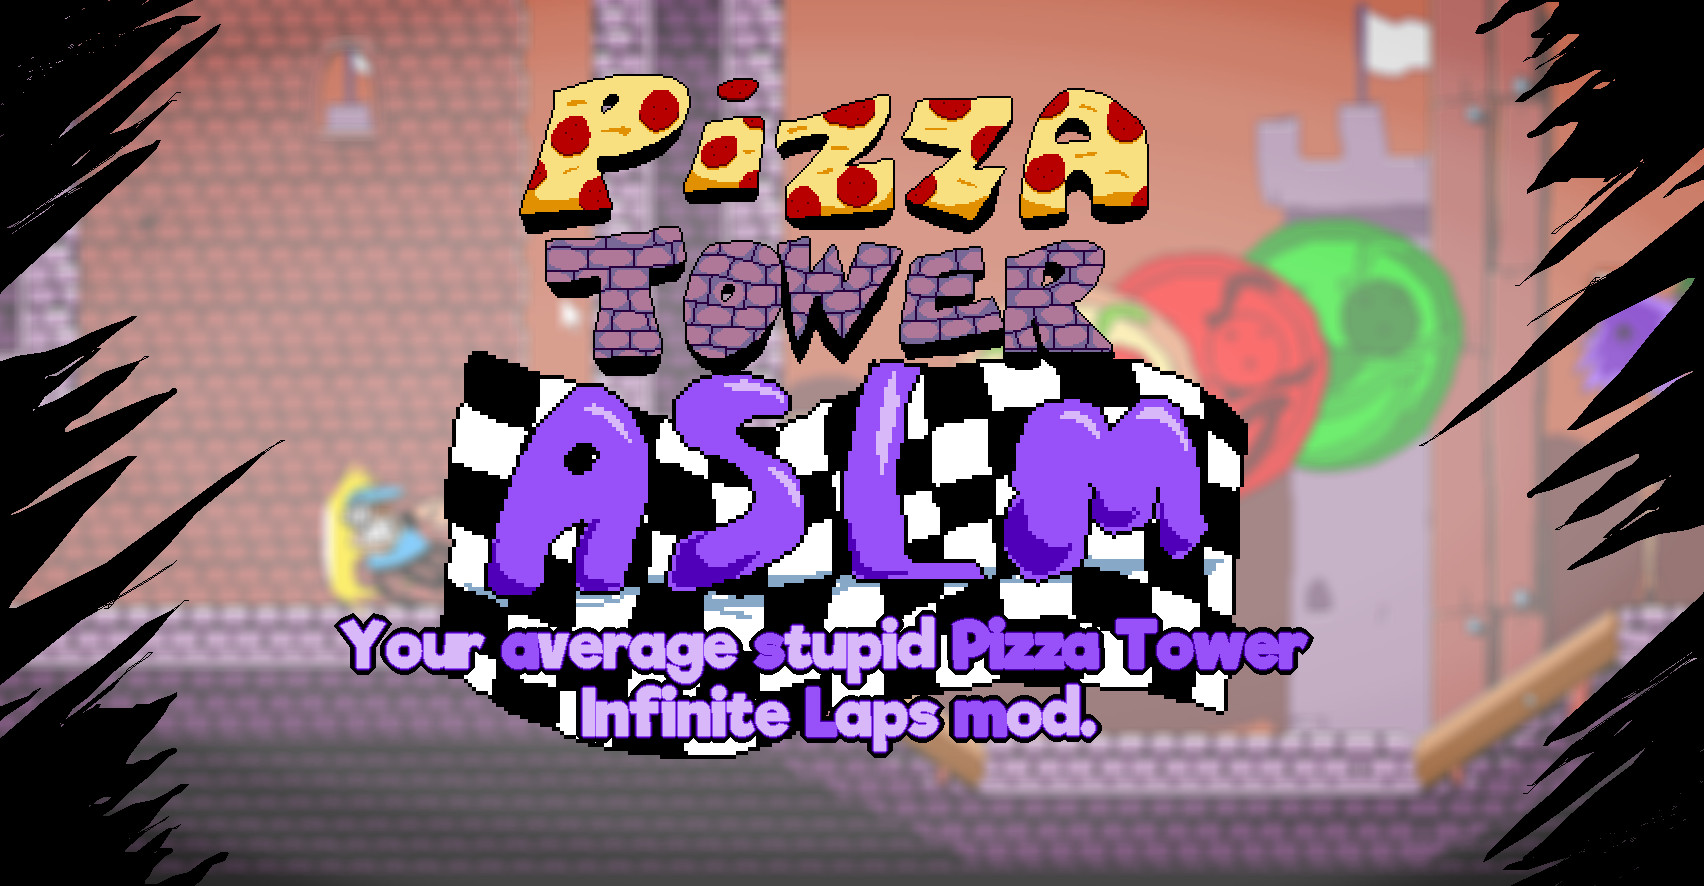 Pizza tower scam ad : r/PizzaTower